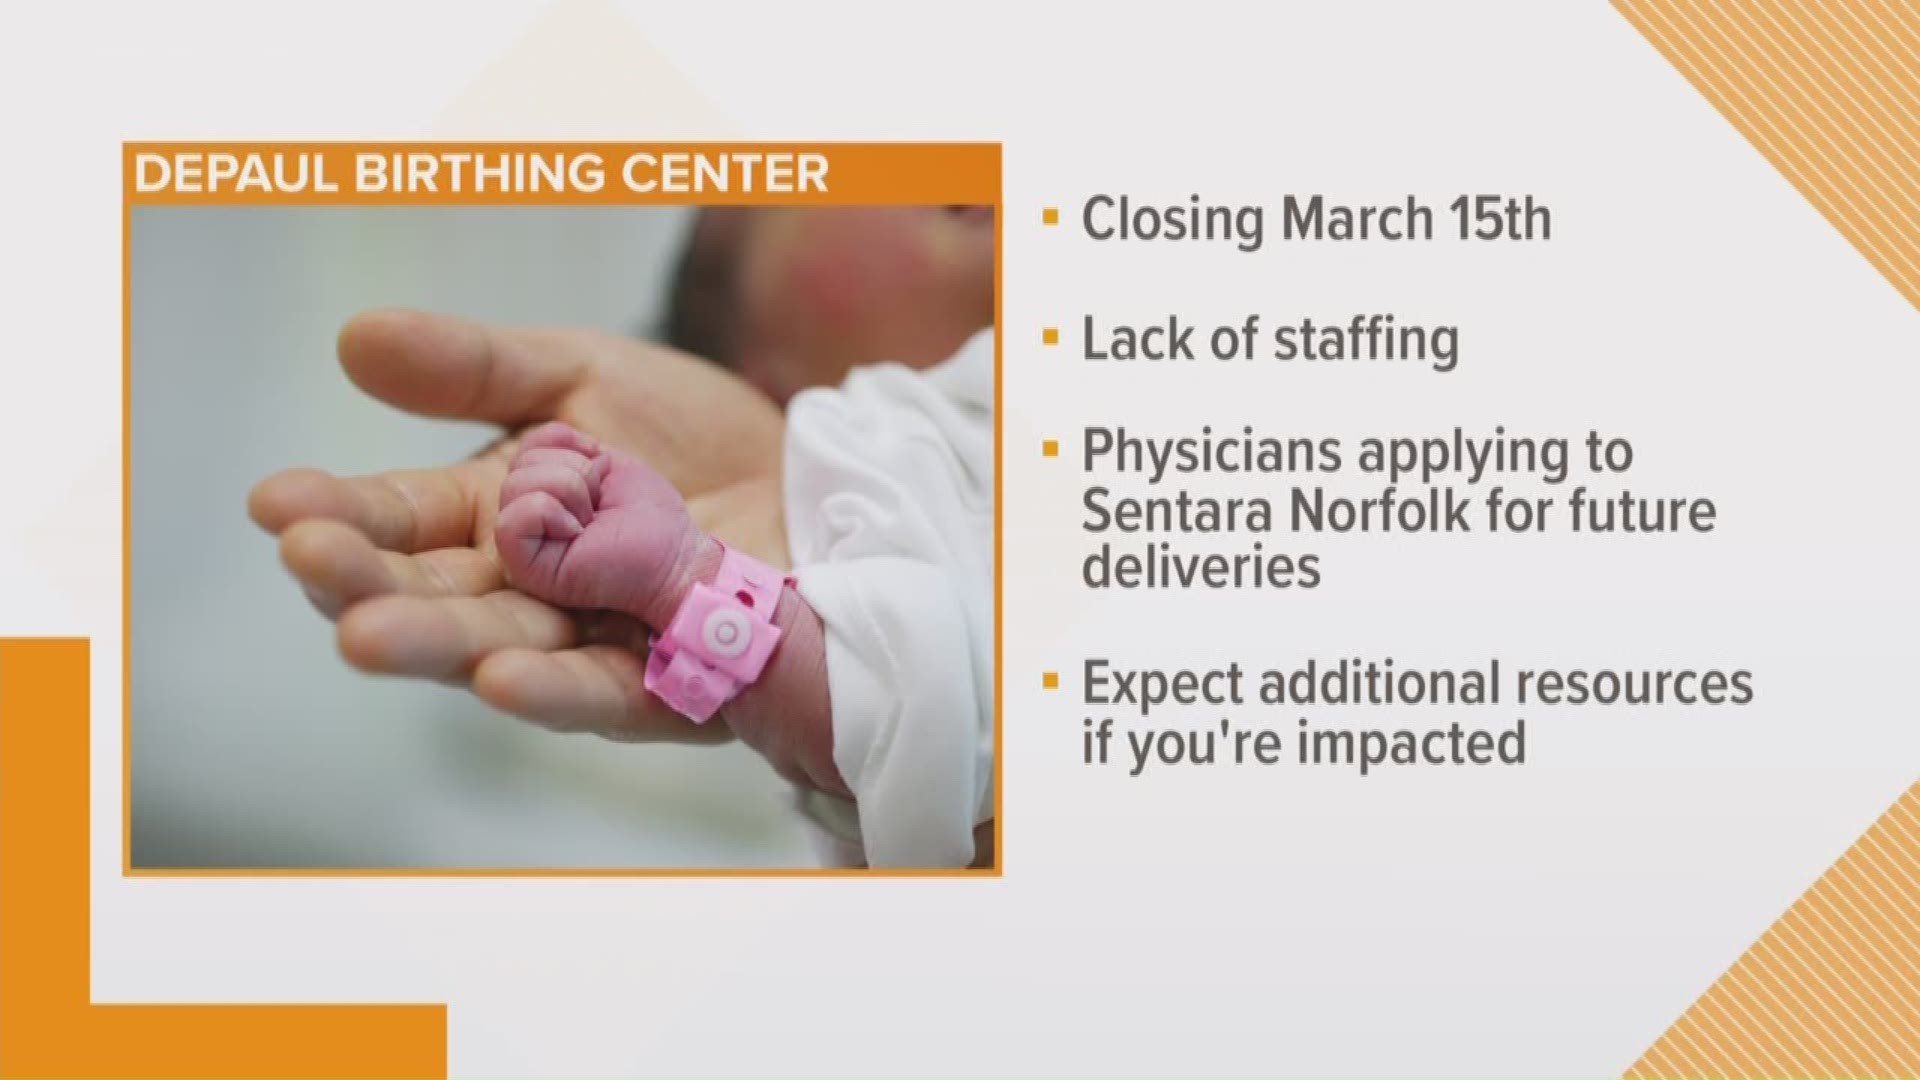 Bon Secours announced it is closing its birthing center at DePaul Medical Center in Norfolk.